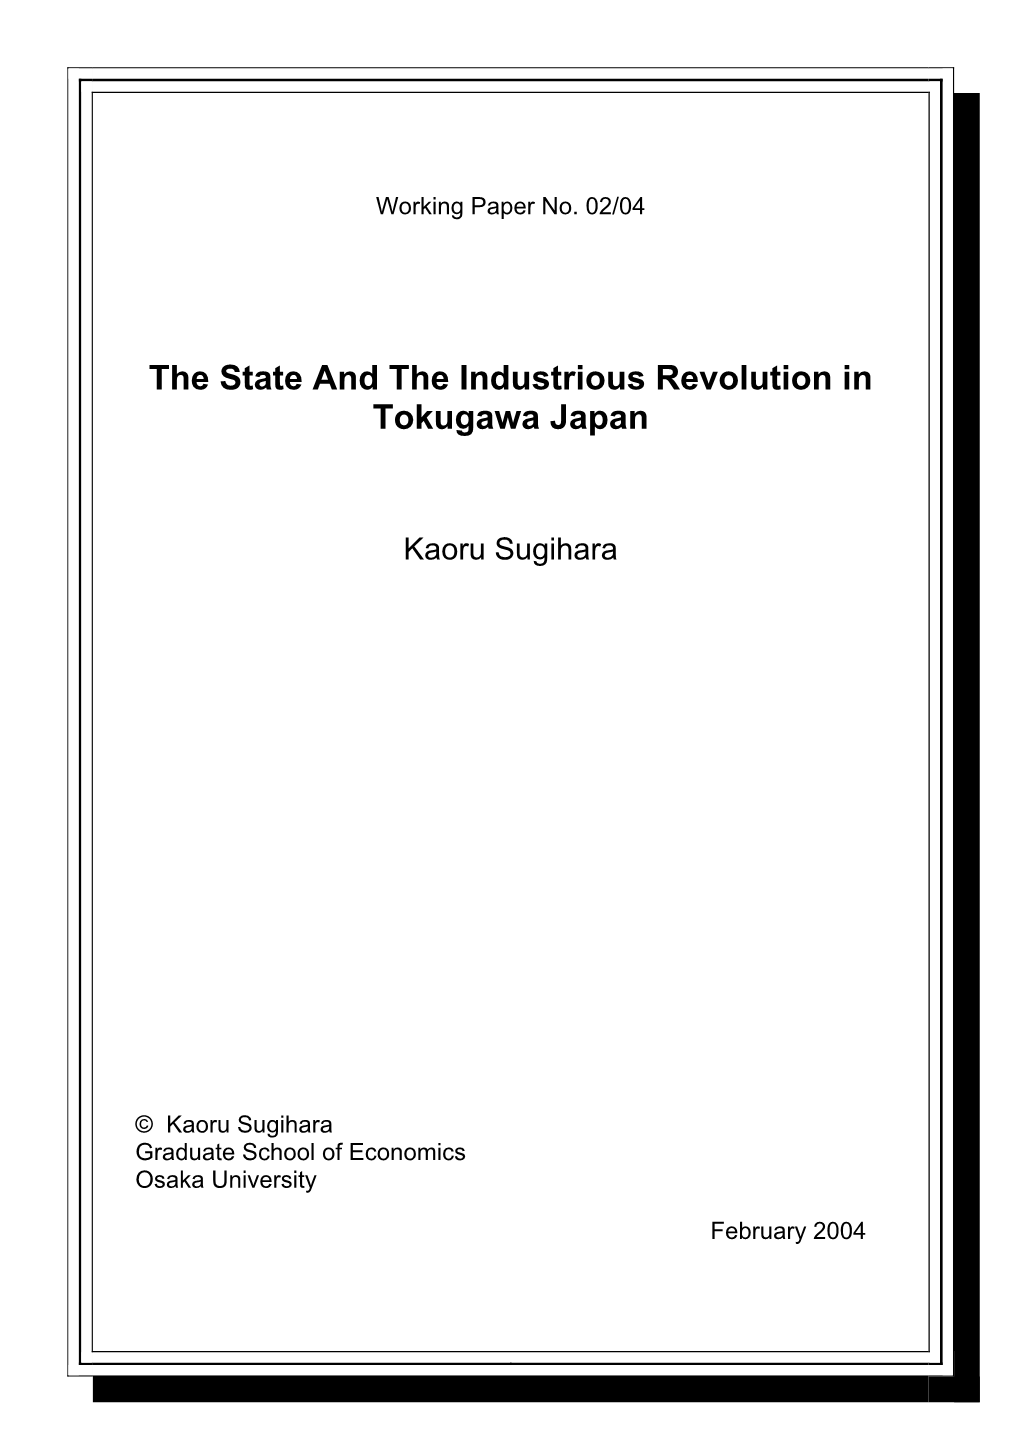 The State and the Industrious Revolution in Tokugawa Japan